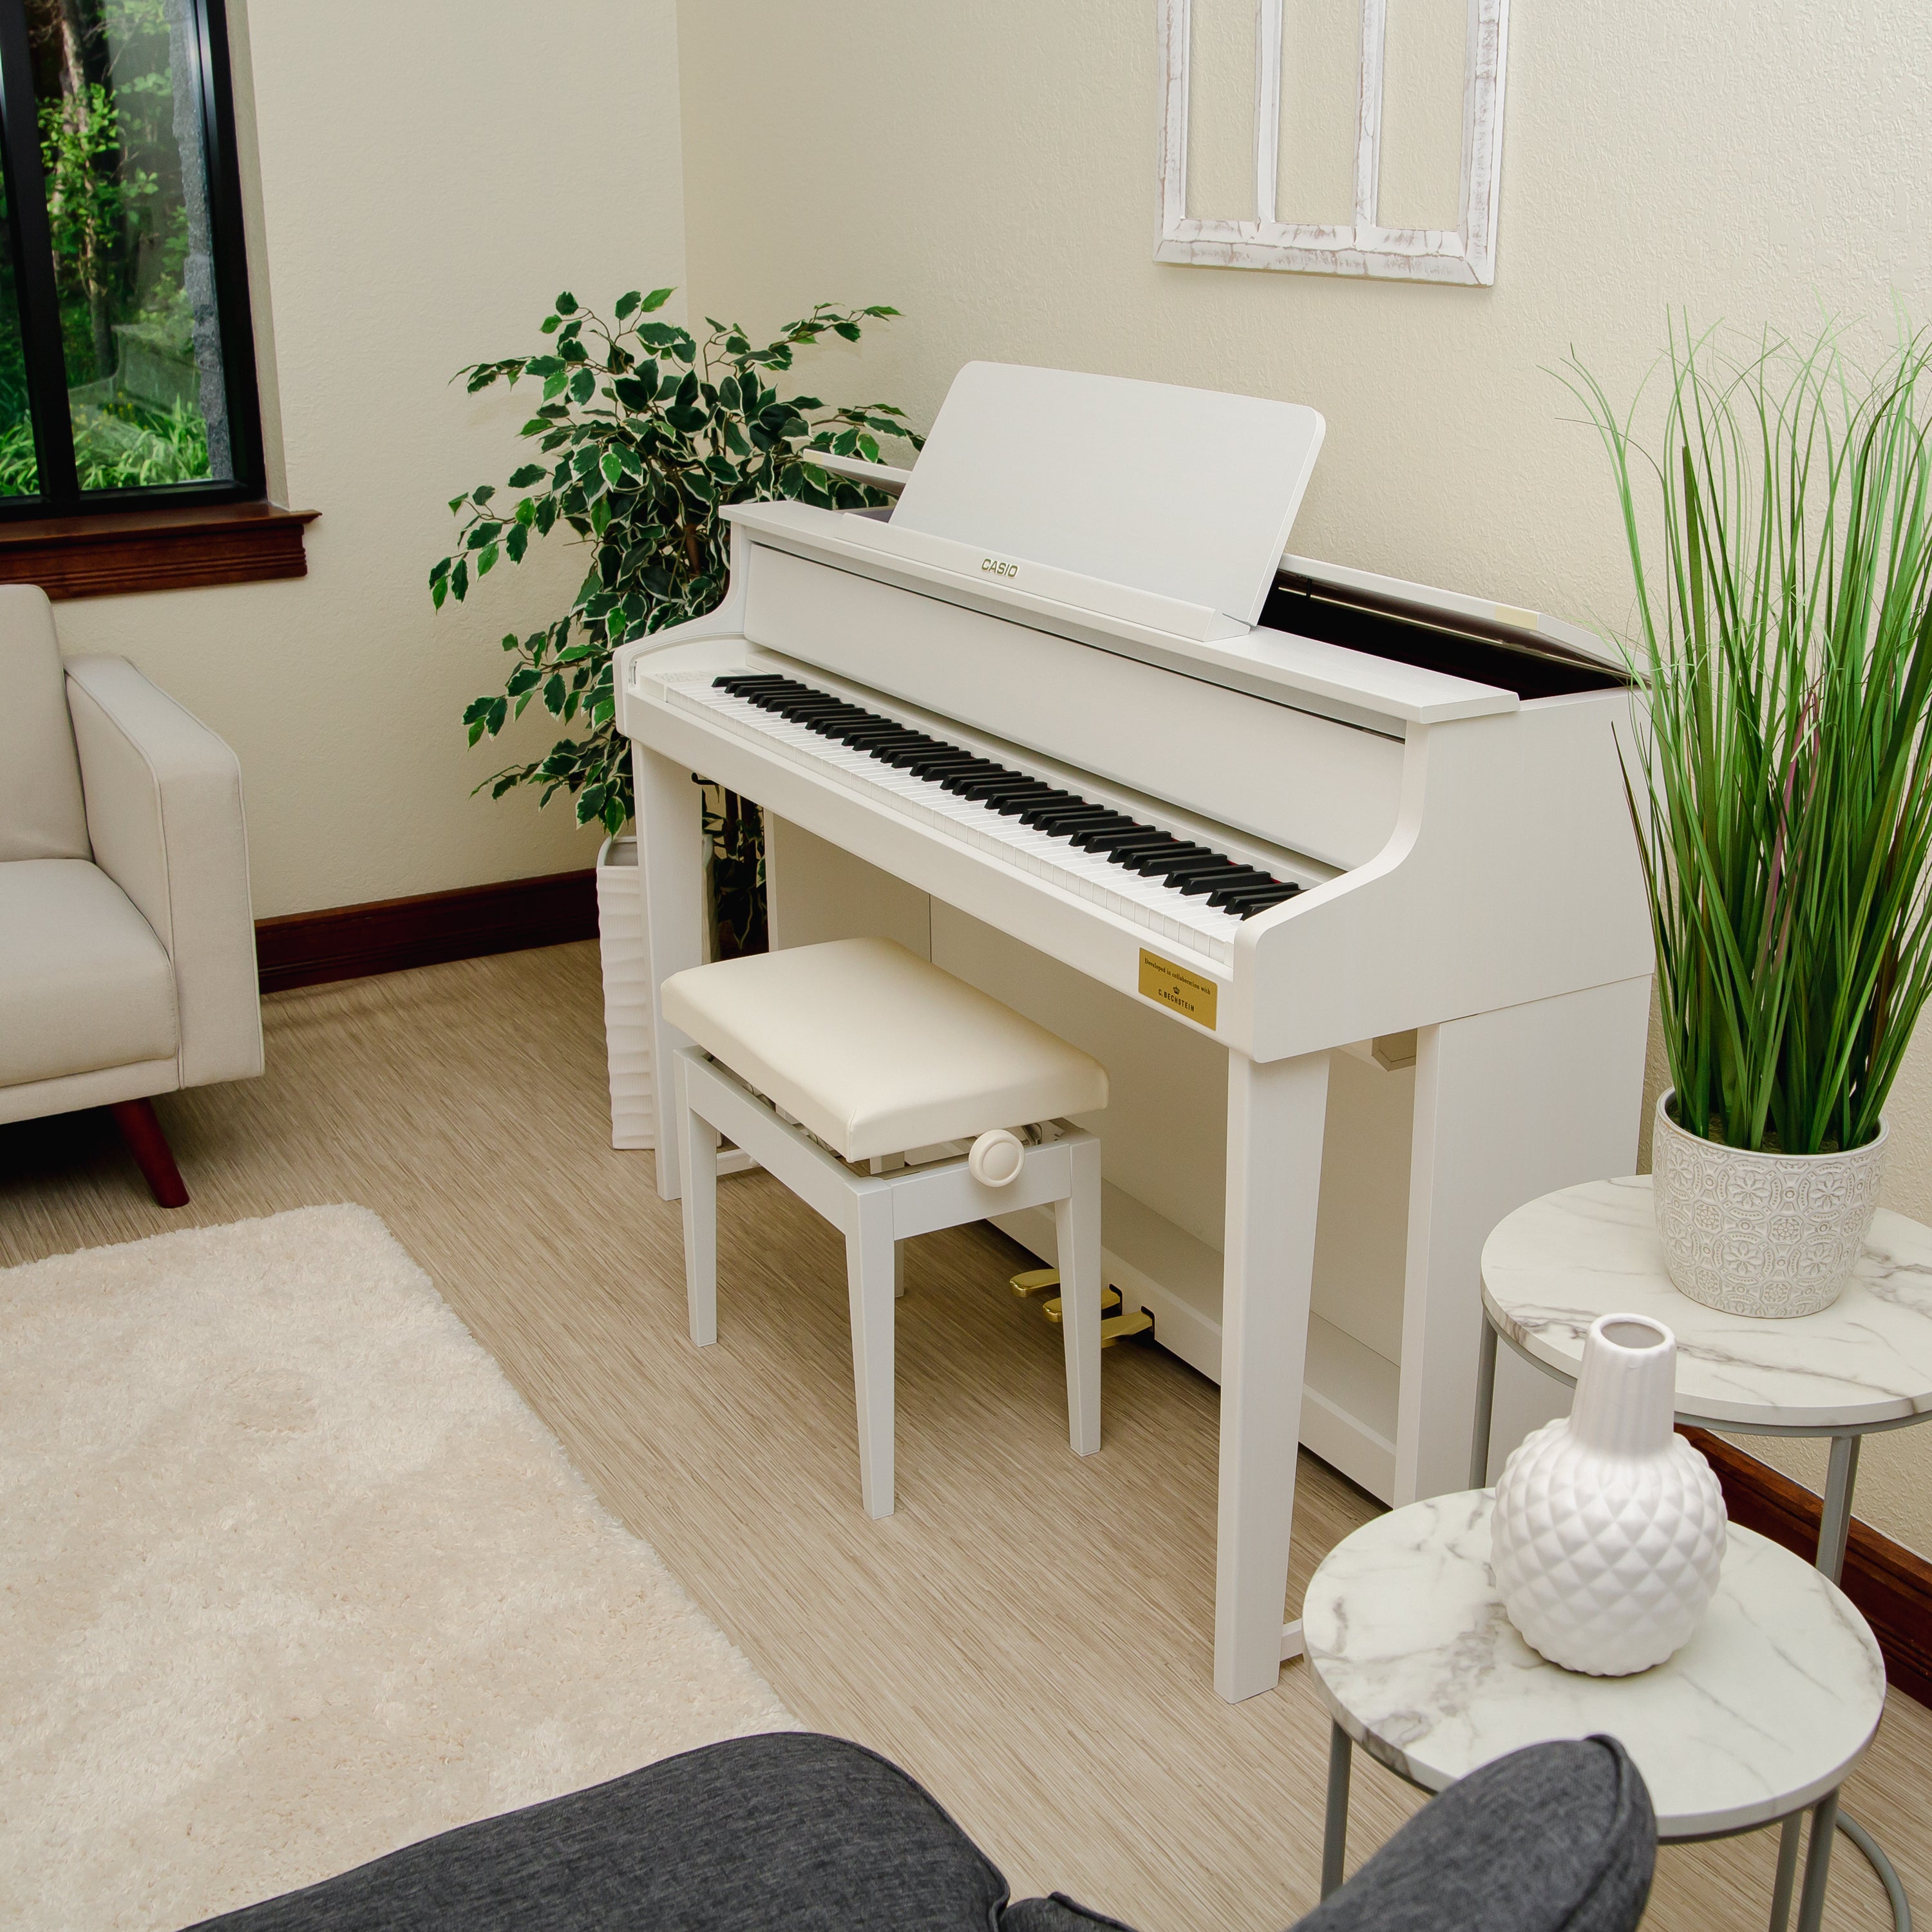 Casio Celviano Grand Hybrid GP-310 Digital Piano - Natural White Wood - Left angle in a stylish living room